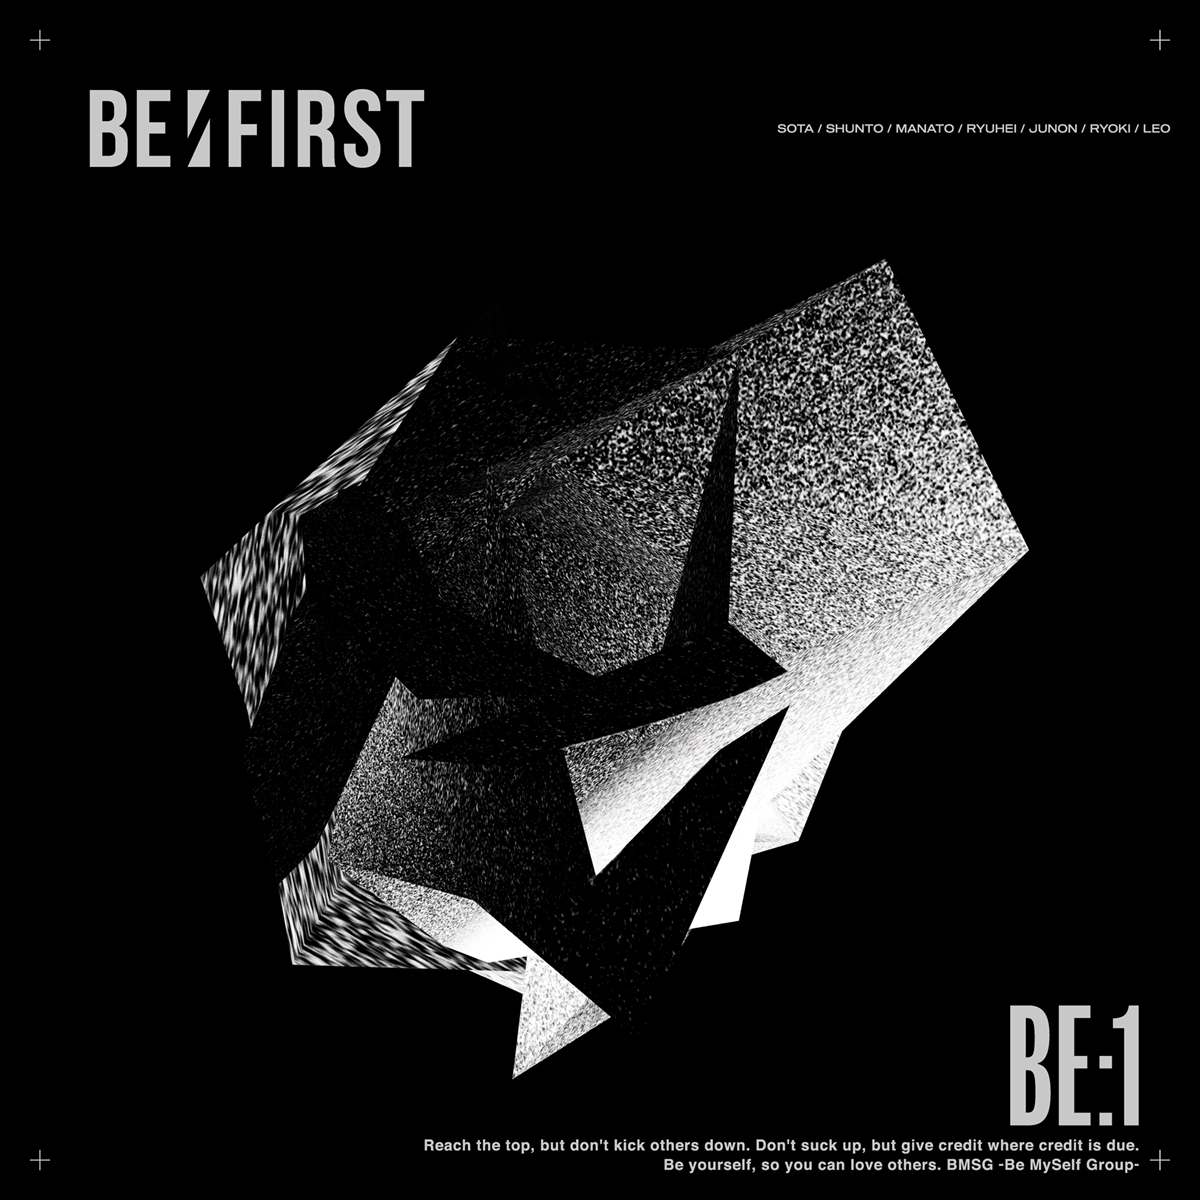 BE:FIRST 1stアルバム「BE:1」